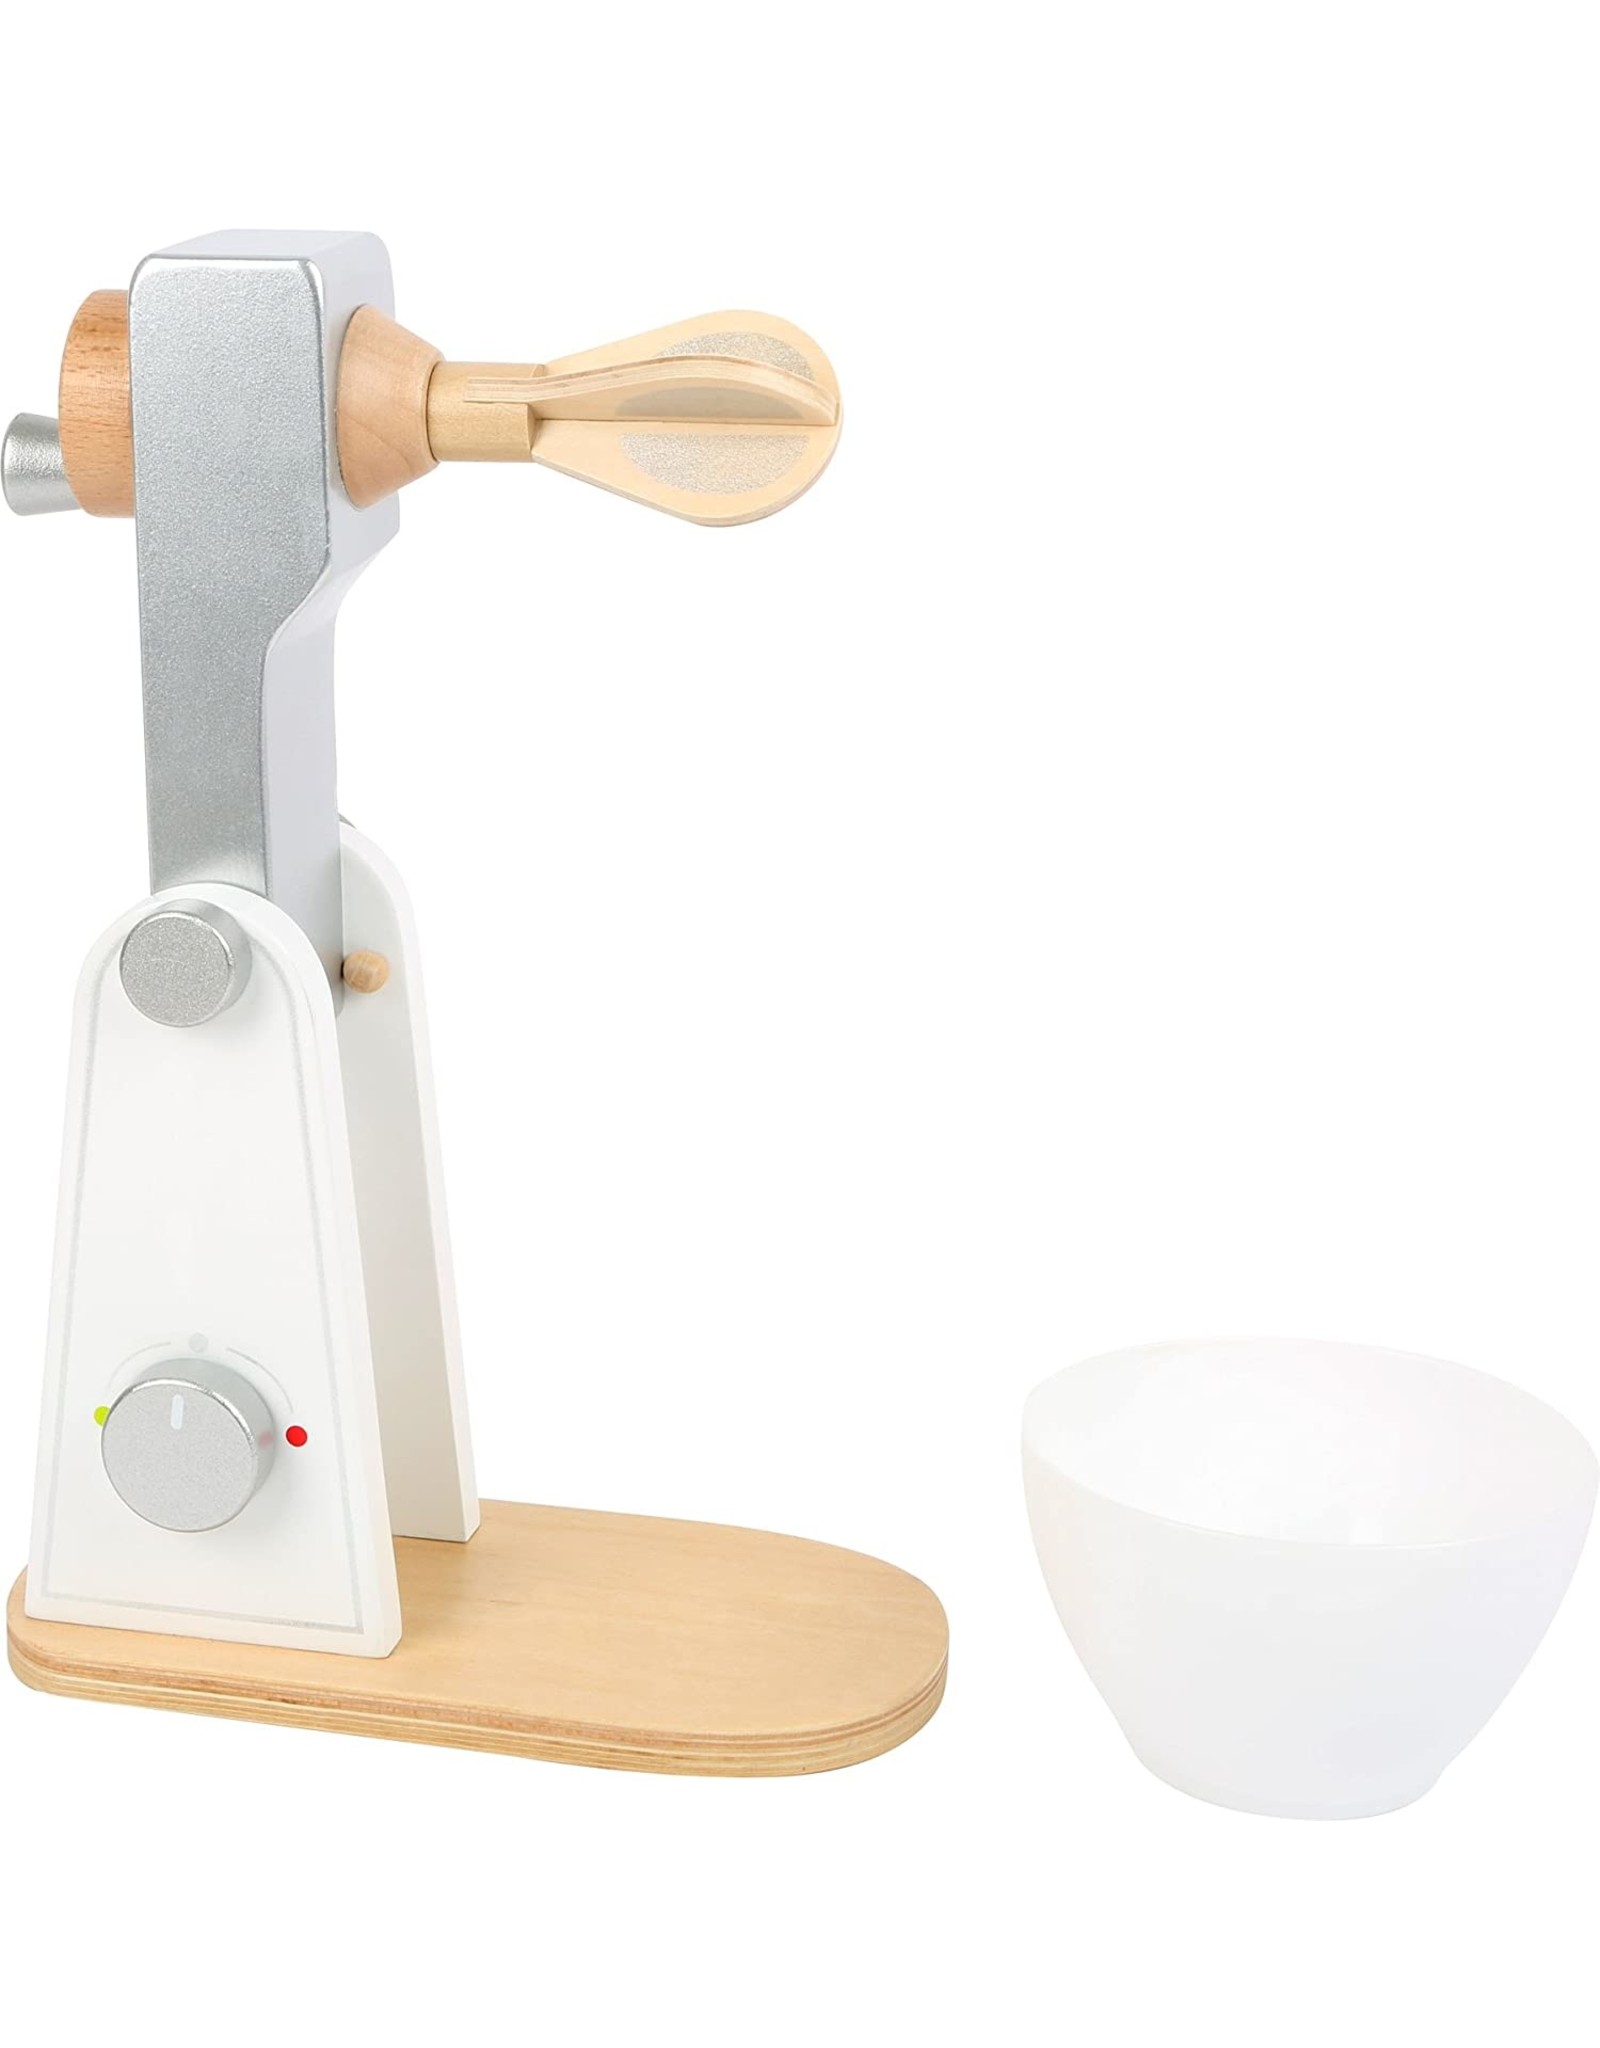 Mixer for Play Kitchens